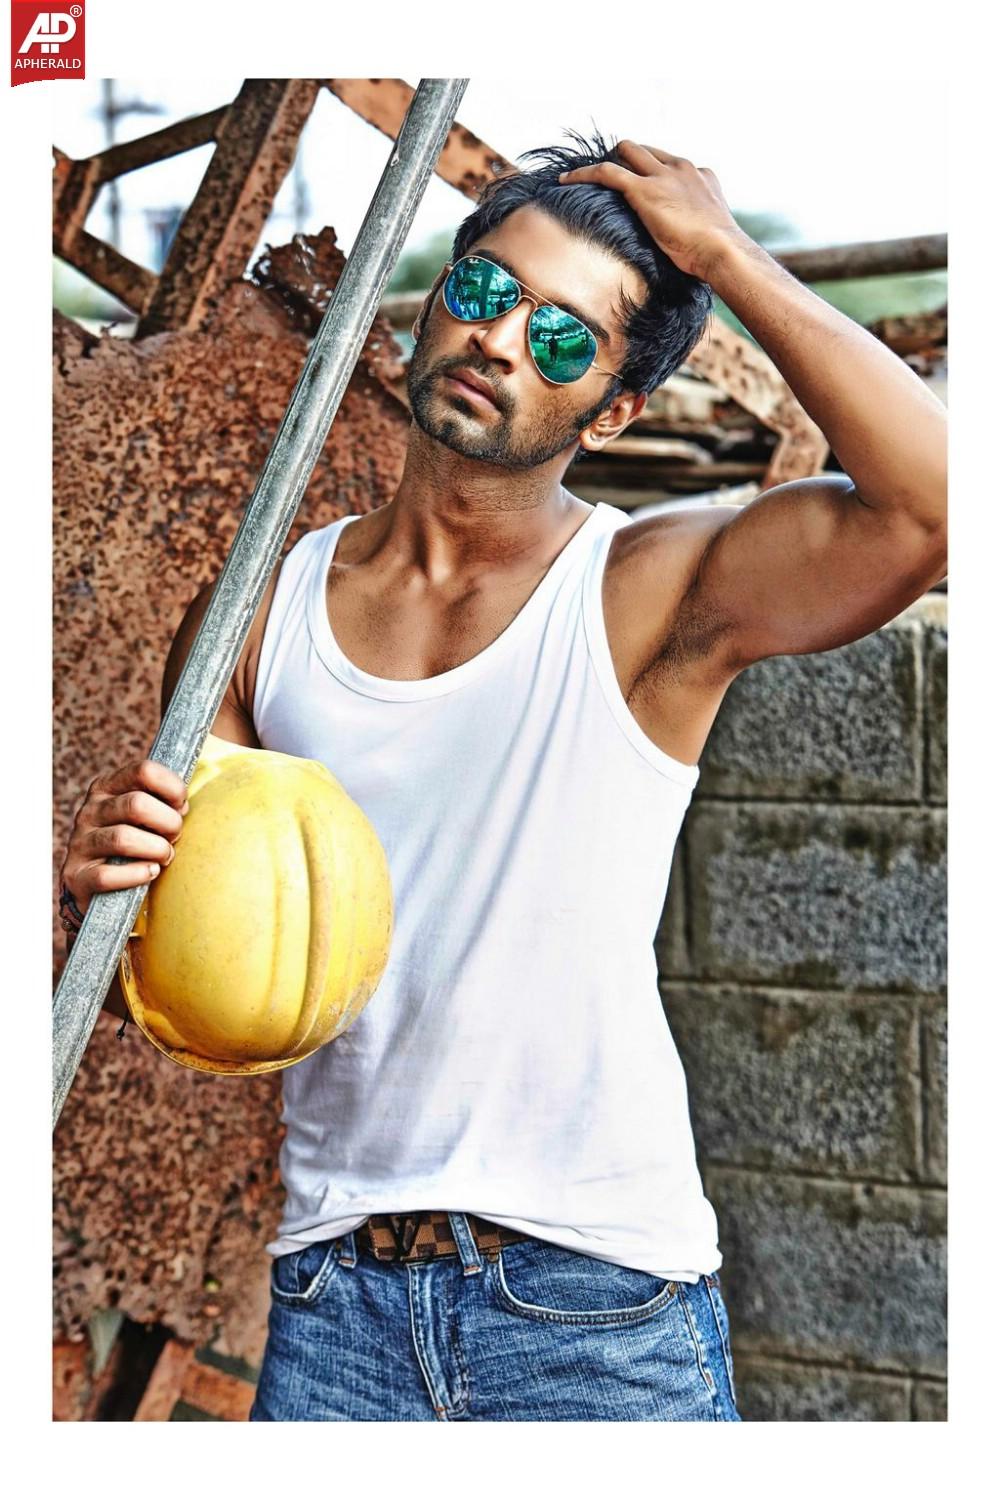 Stylish and smart pictures of birthday boy Atharvaa